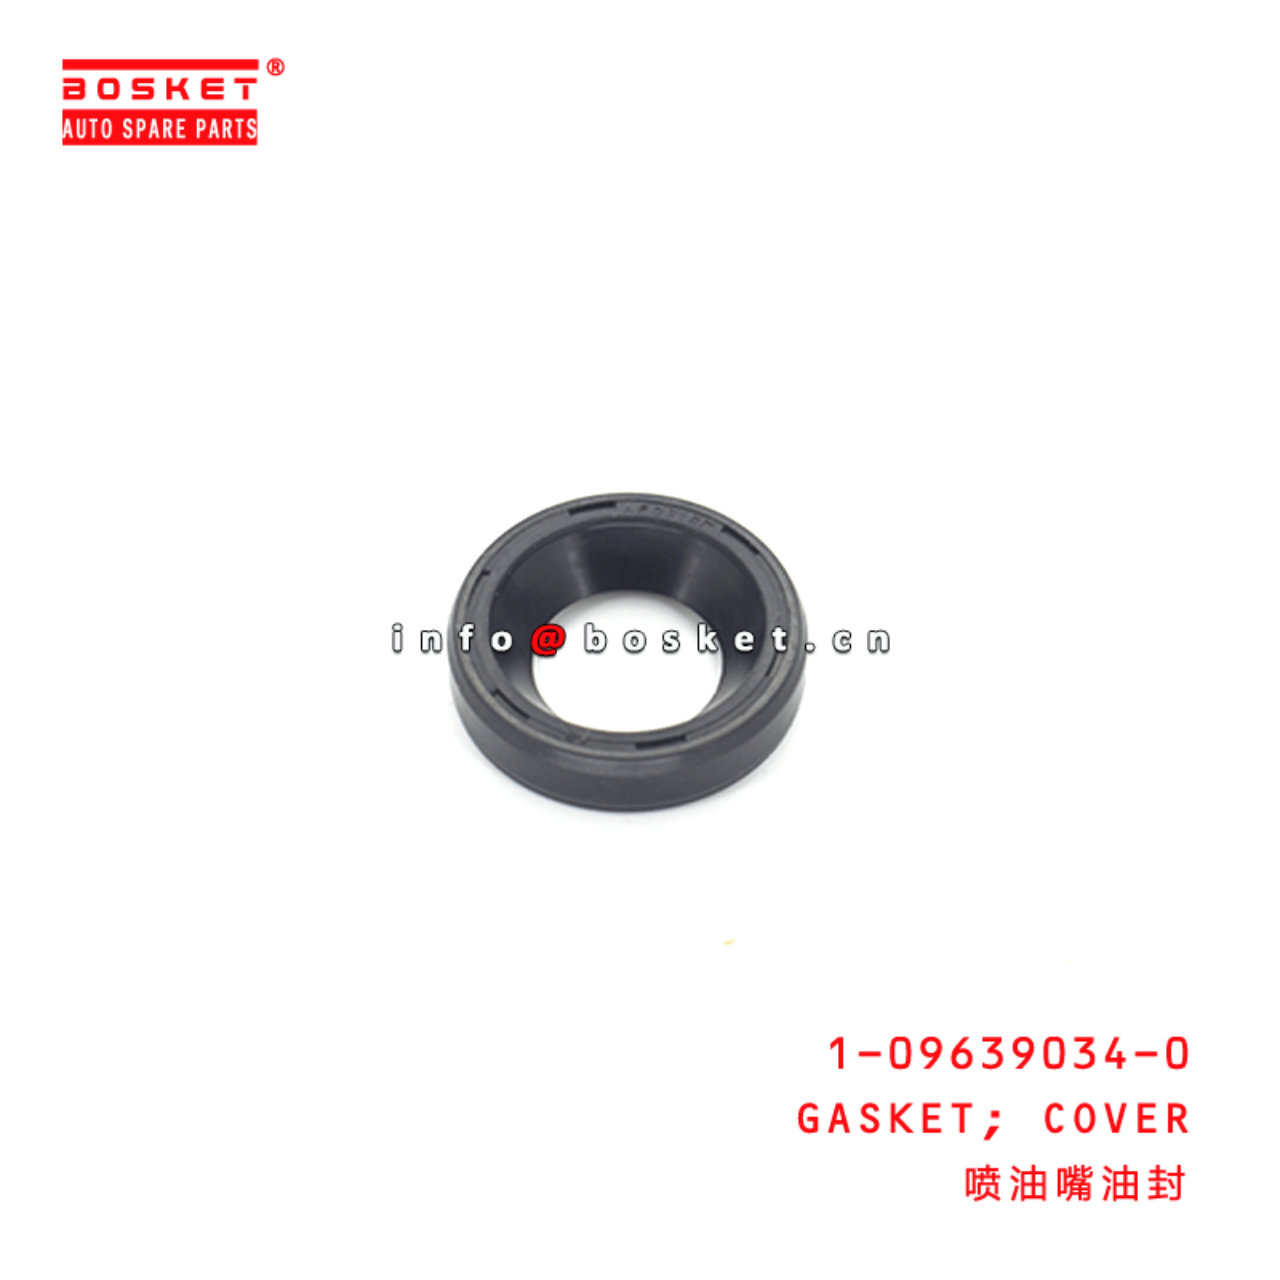 1-09639034-0 Cover Gasket 1096390340 Suitable for ISUZU FVR34 6HK1